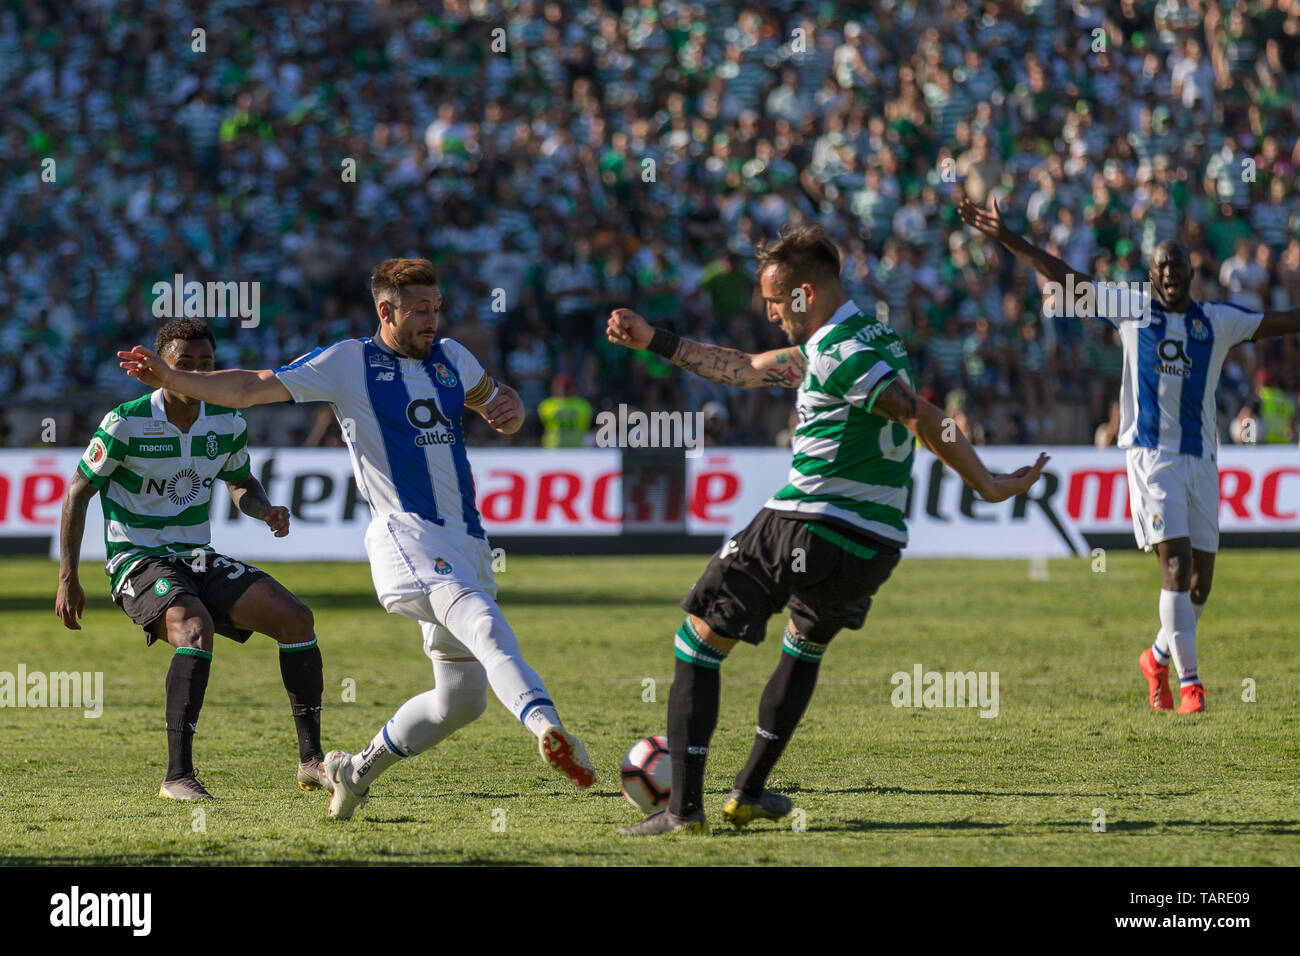 May 25, 2019. Oeiras, Portugal. Porto's midfielder from Mexico Hector Herrera (16) and Sporting's midfielder from Croatia Nemanja Gudelj (86) in action during the game Sporting CP vs FC Porto © Alexandre de Sousa/Alamy Live News Stock Photo